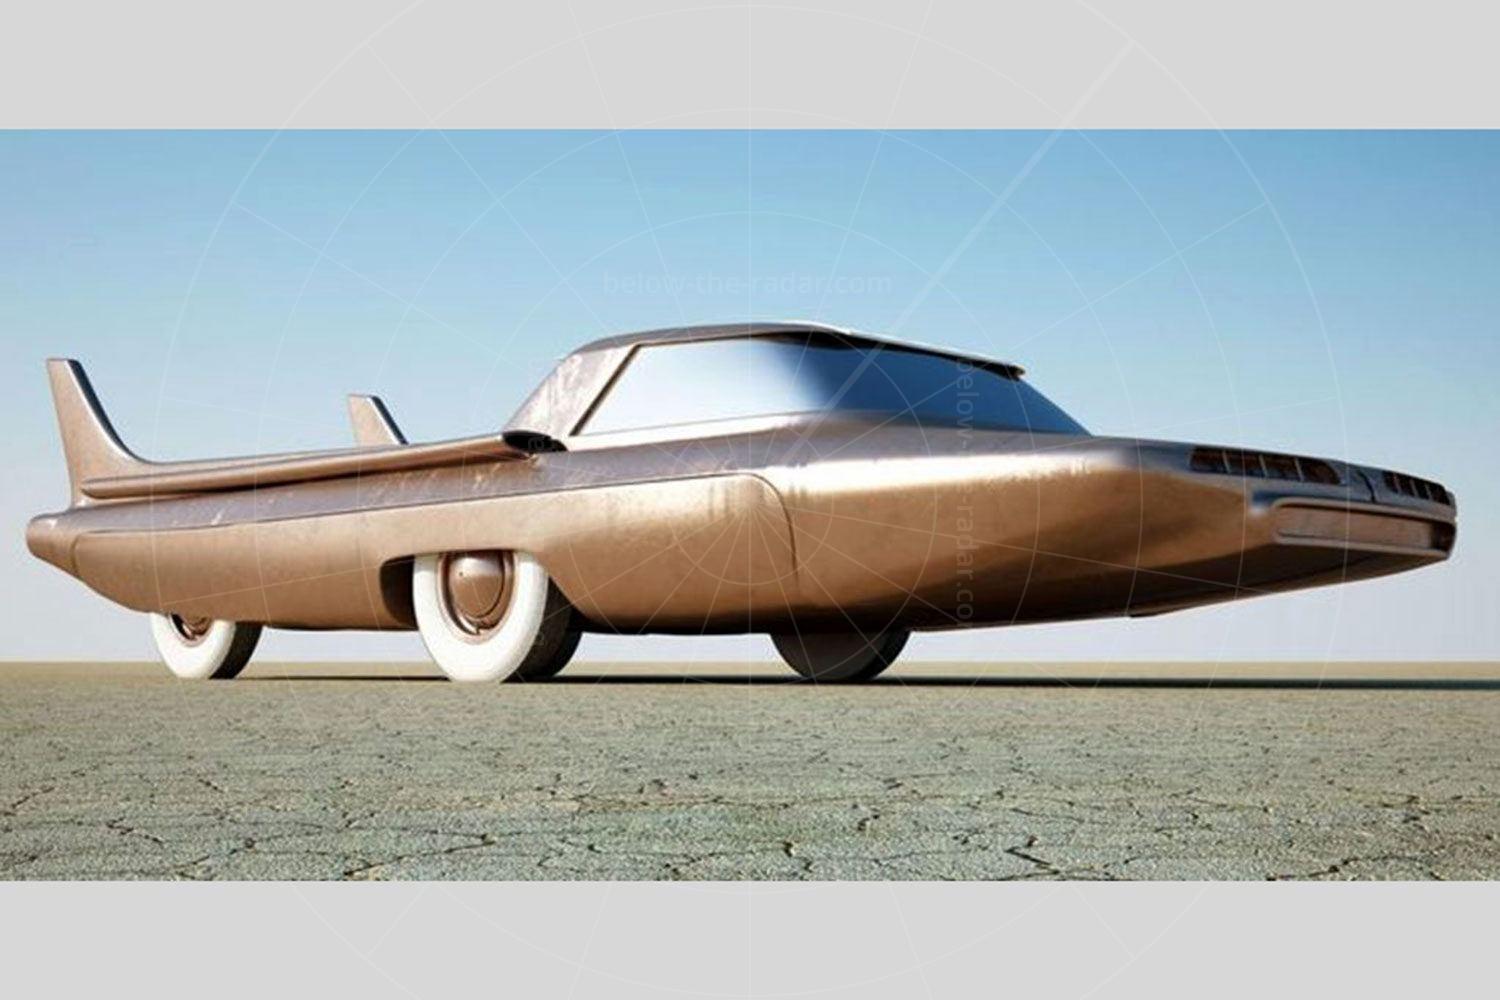 Ford Nucleon concept Pic: Ford | Ford Nucleon concept